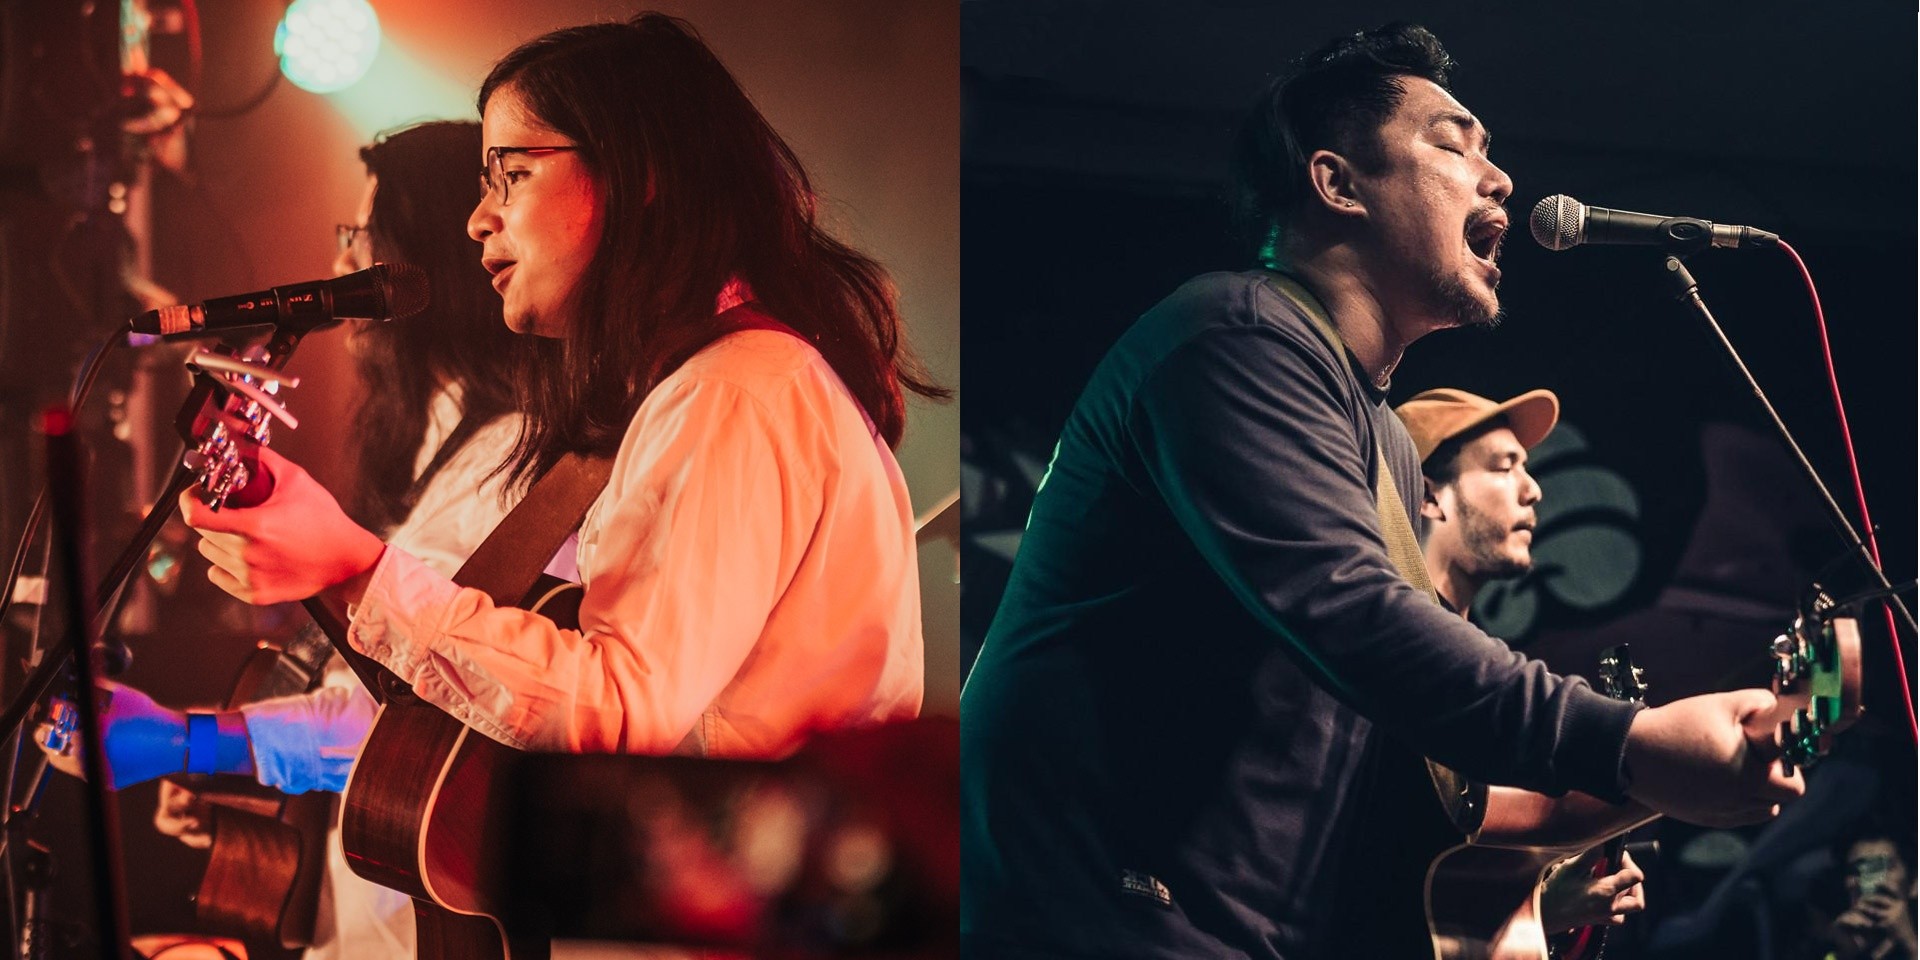 Ben&Ben, December Avenue, and more release new music on Valentine's Day